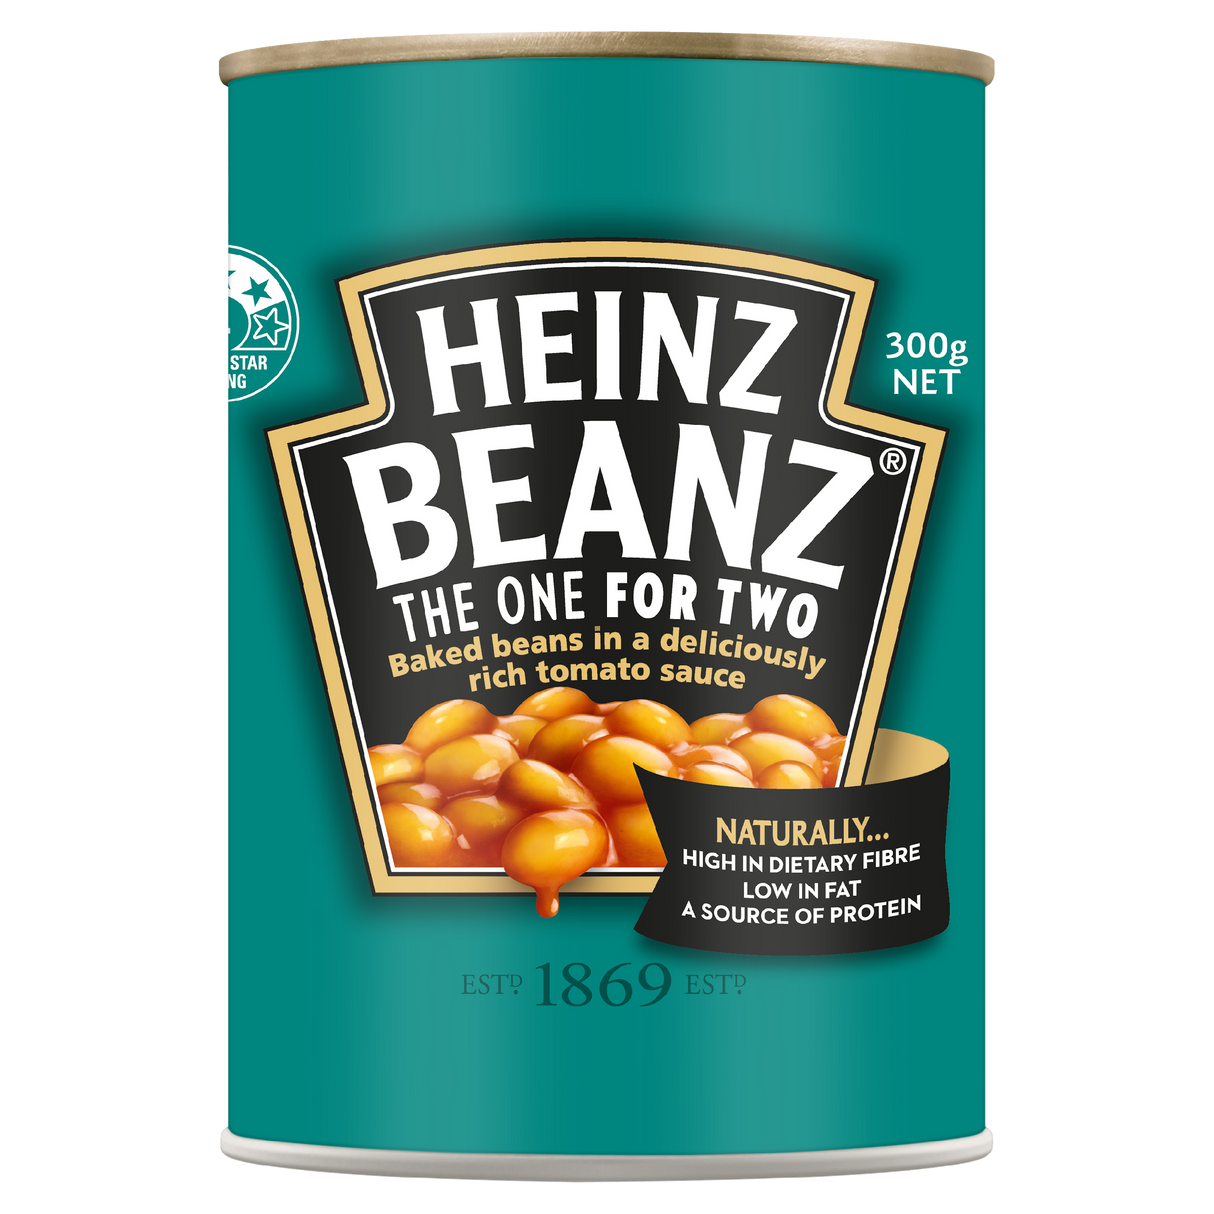 Heinz Beanz The One for Two 300g